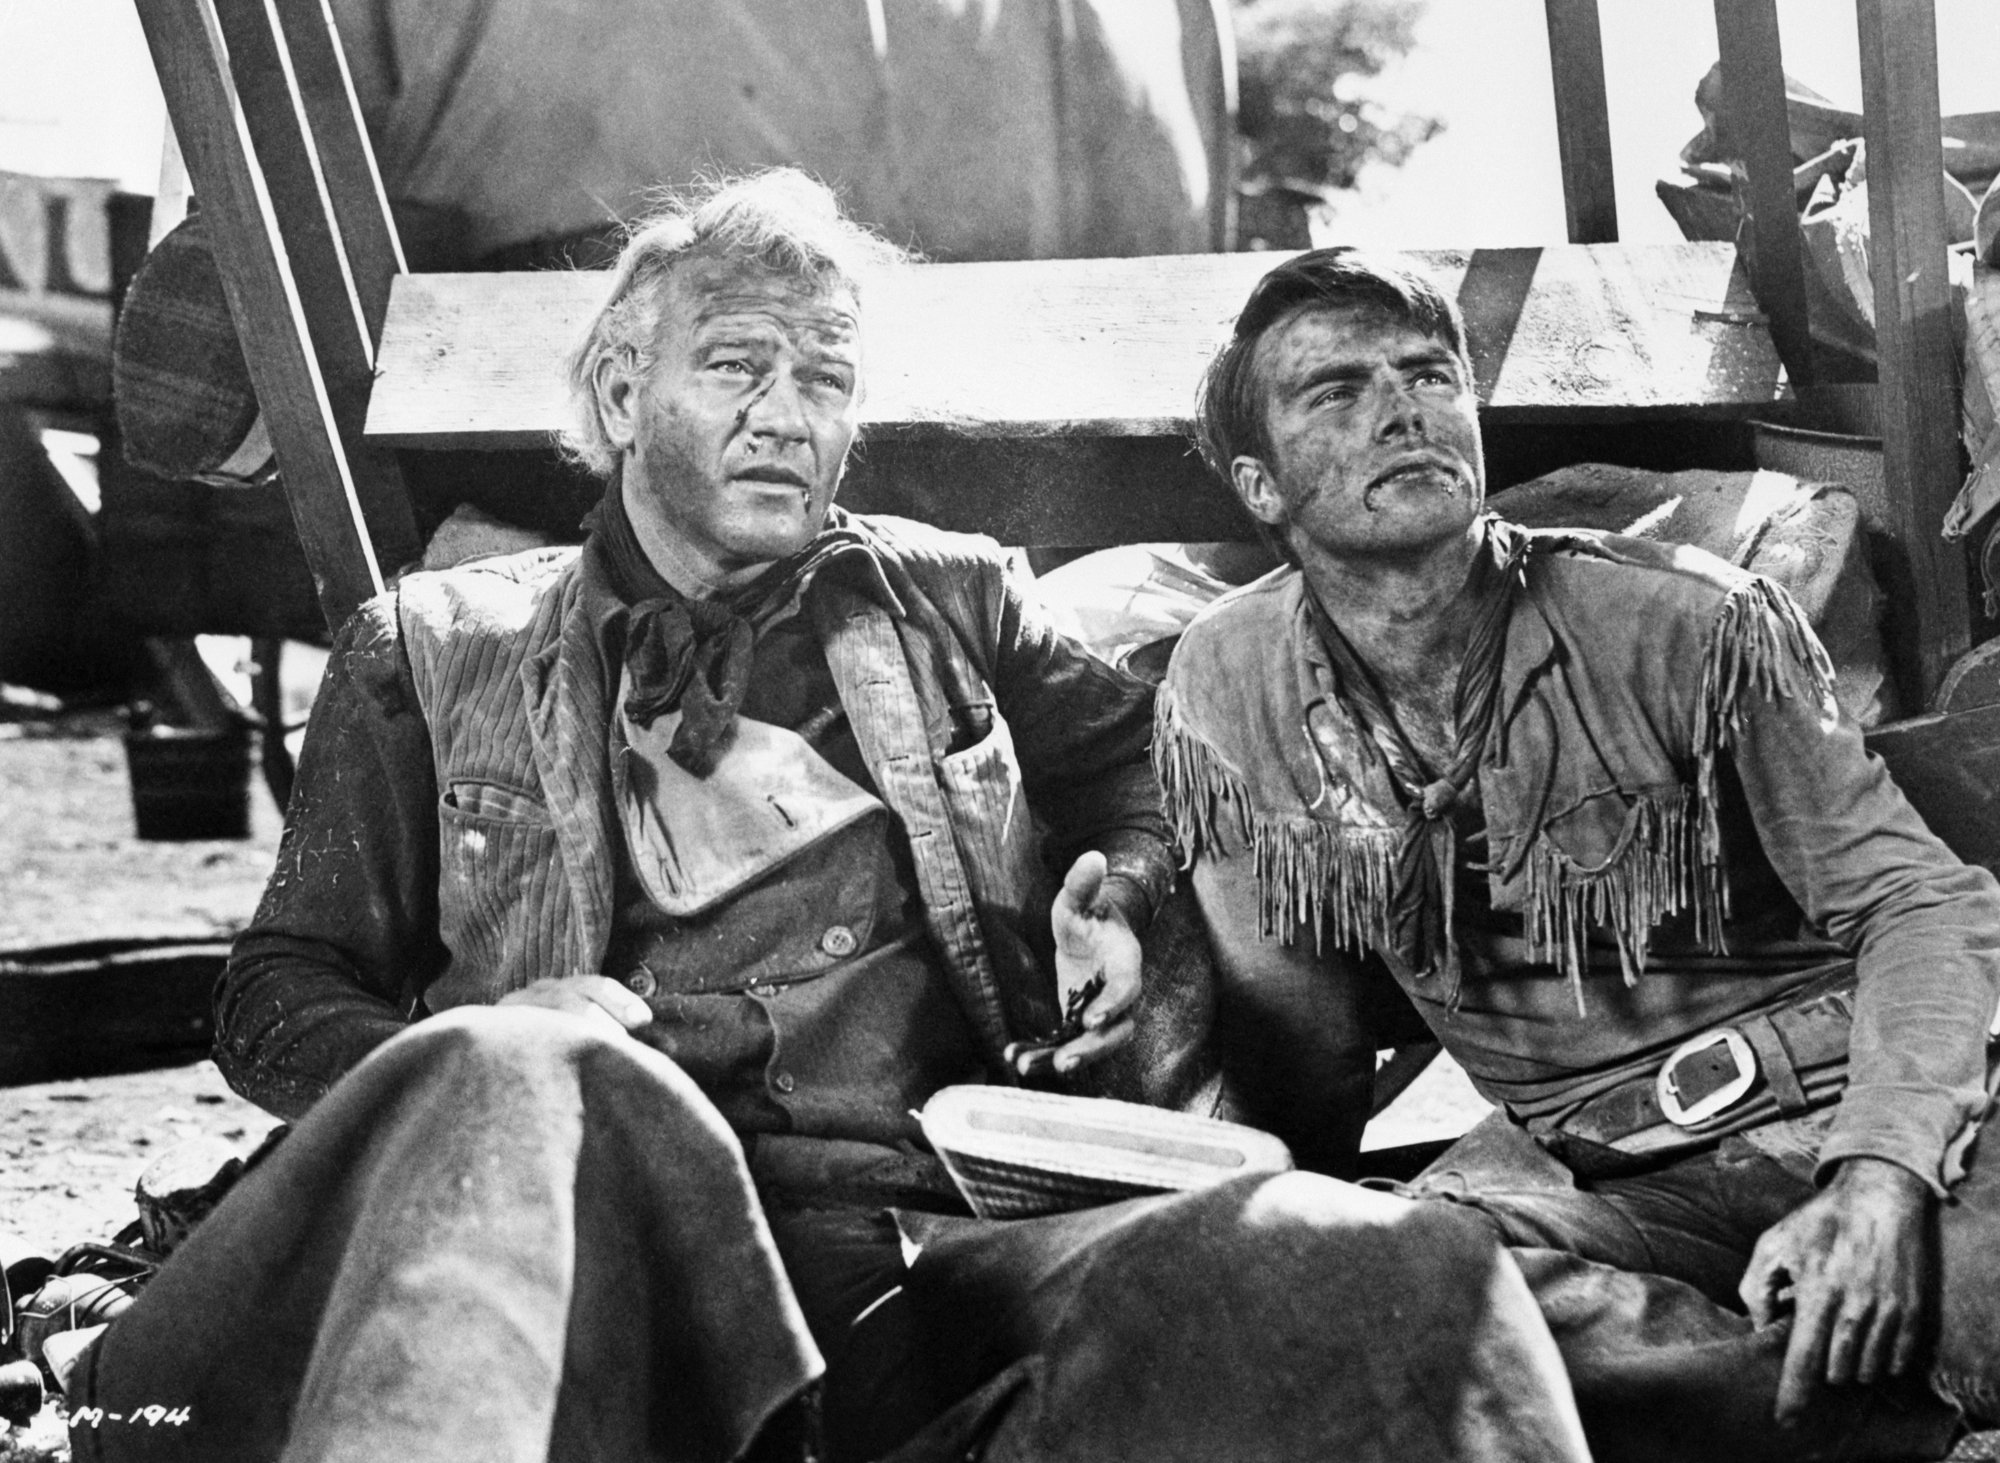 'Red River' actors John Wayne as Thomas Dunson and Montgomery Clift as Matt Garth sitting next to each other beaten up